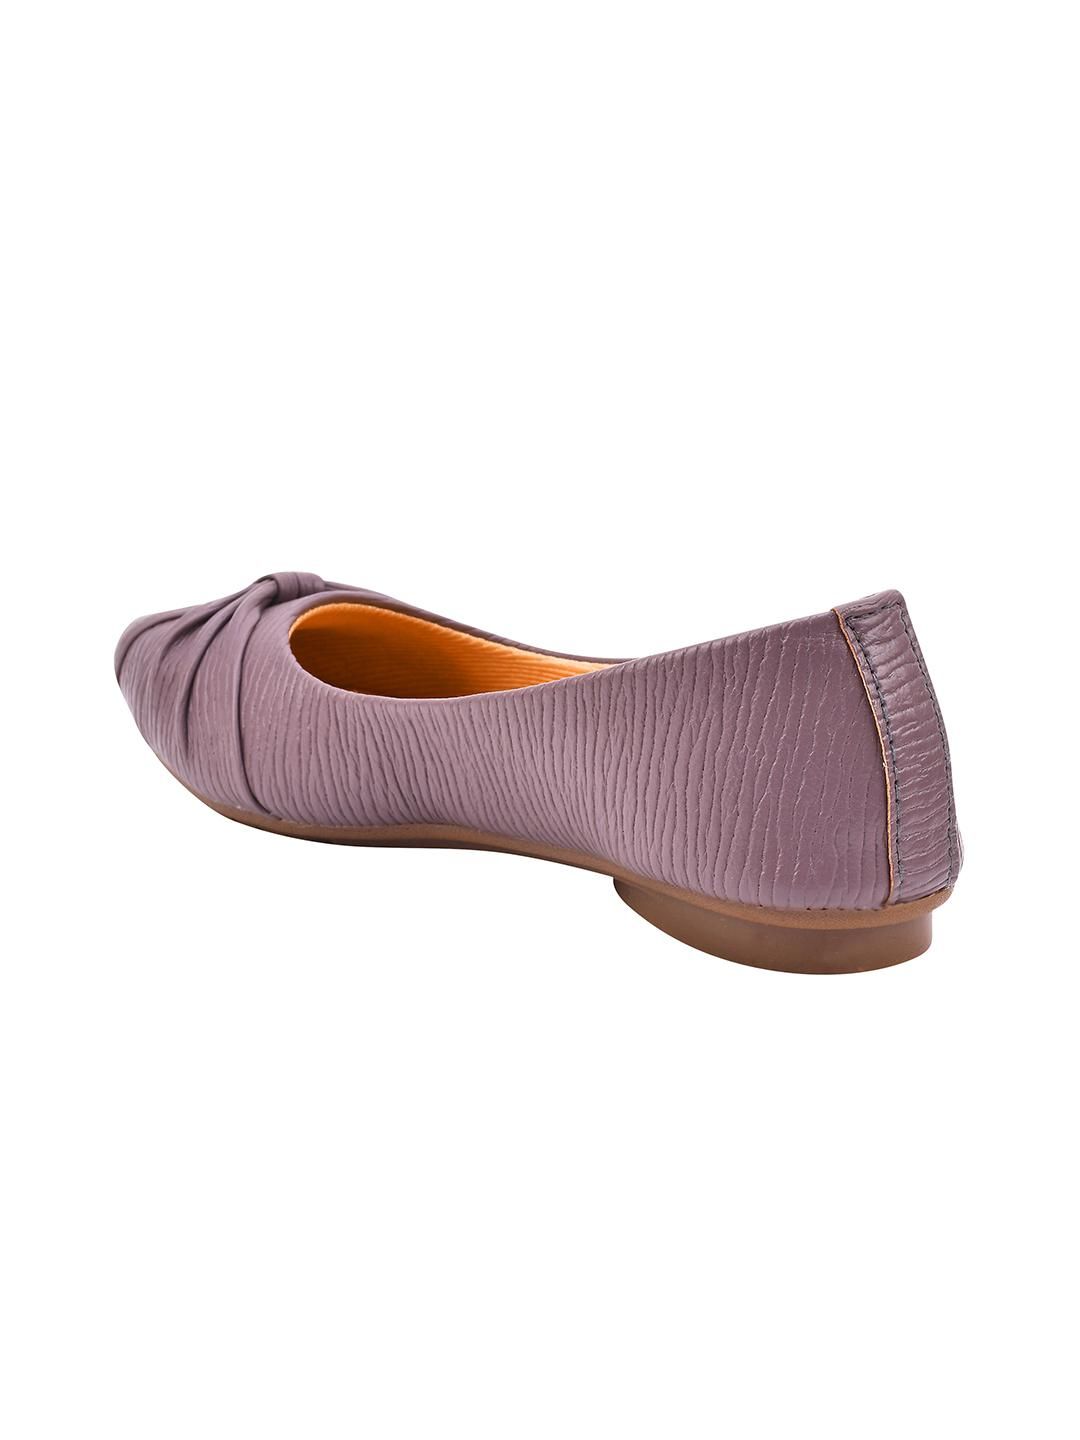 Comfortable And Stylish Flat Sandal For Women